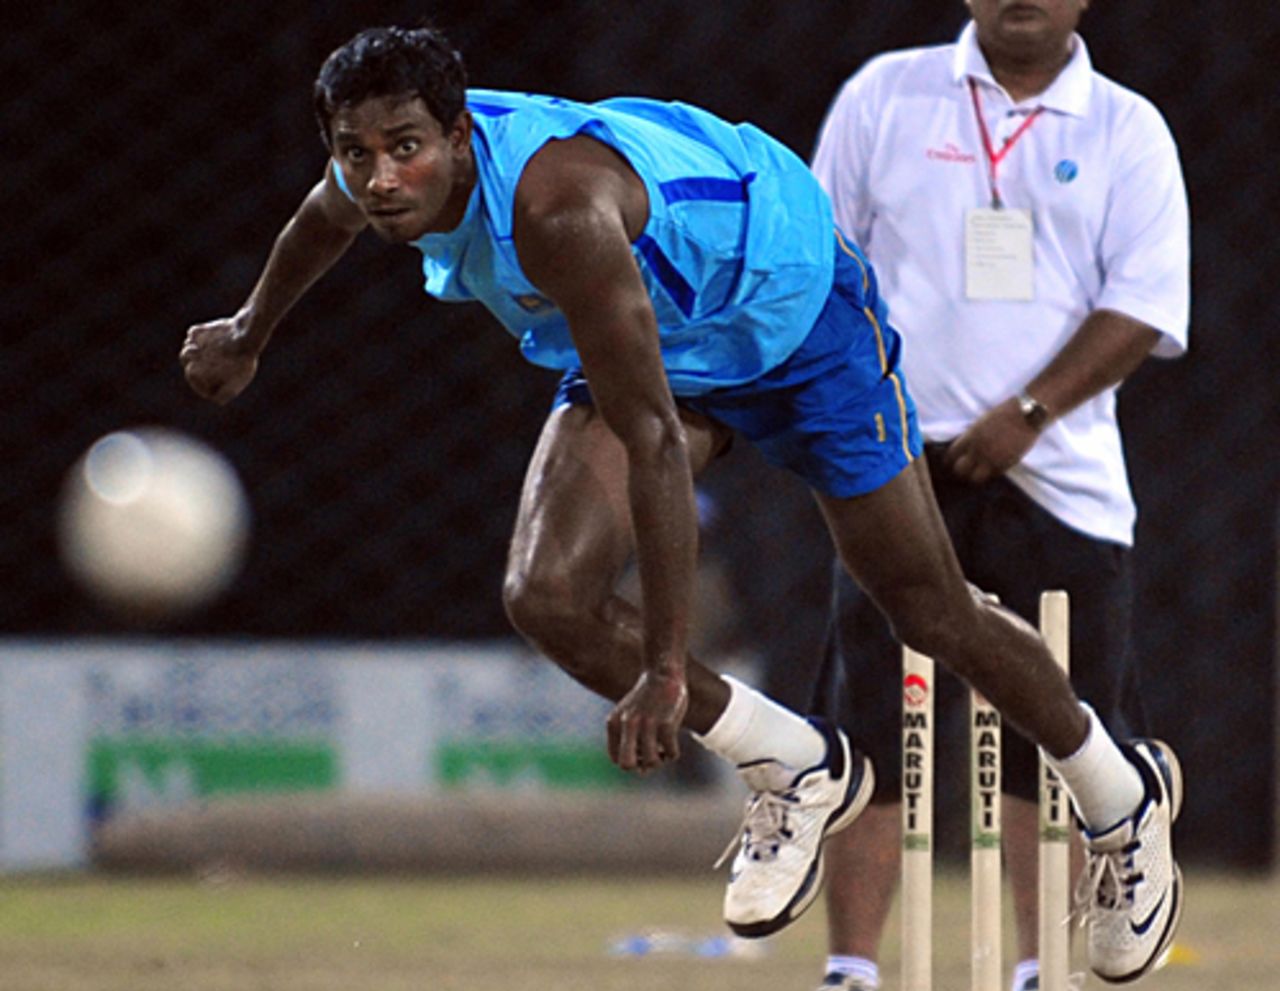 Thilan Thushara bends his back, Colombo, August 11, 2009